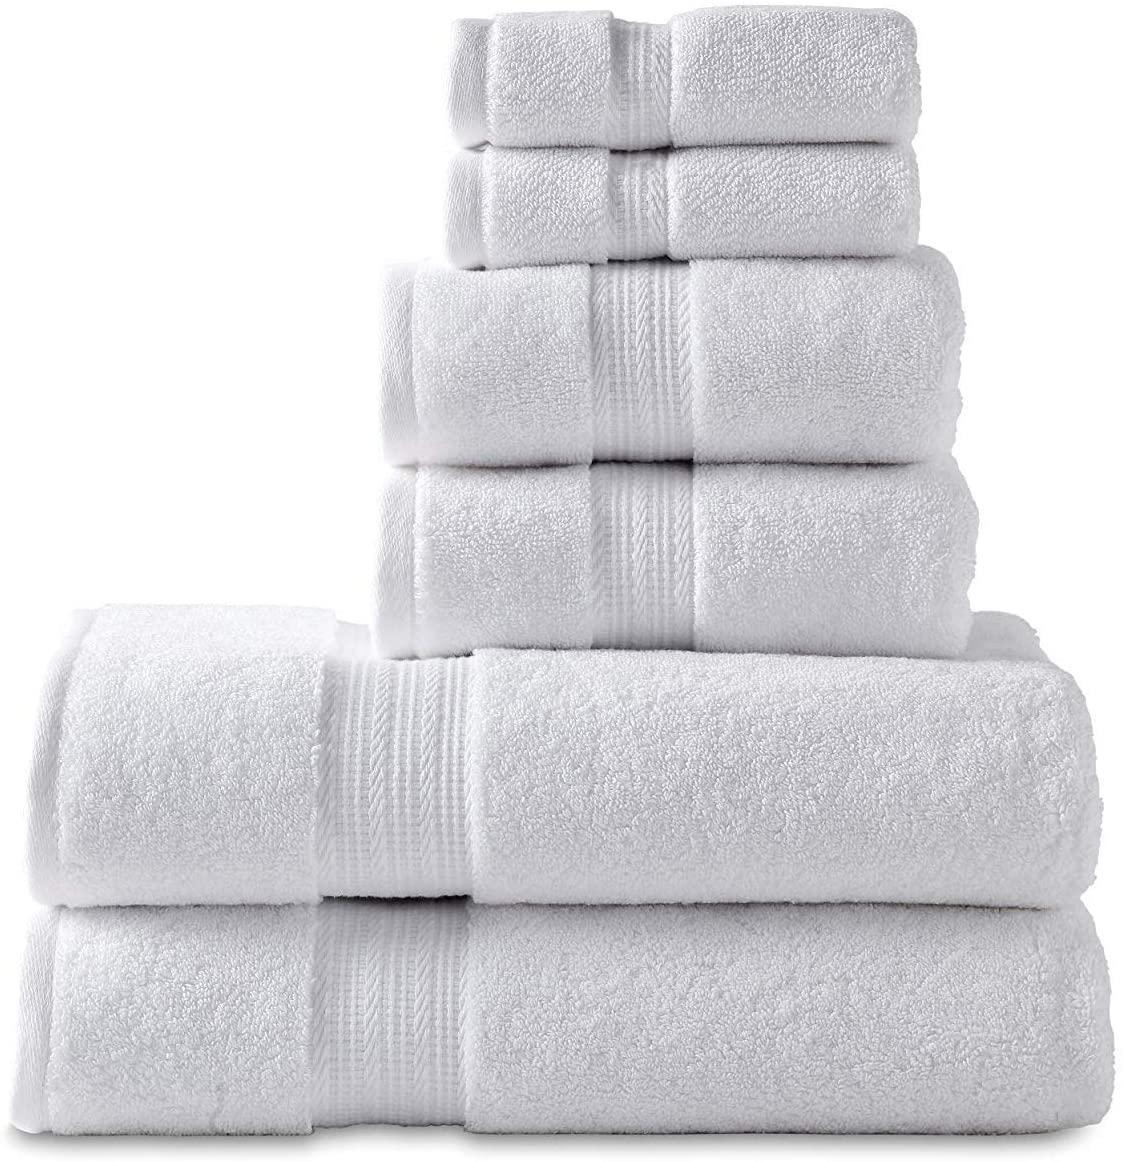 This Set of 8 Cotton Bath Towels Has 11,000 Five-Star Ratings, and It's Only $20